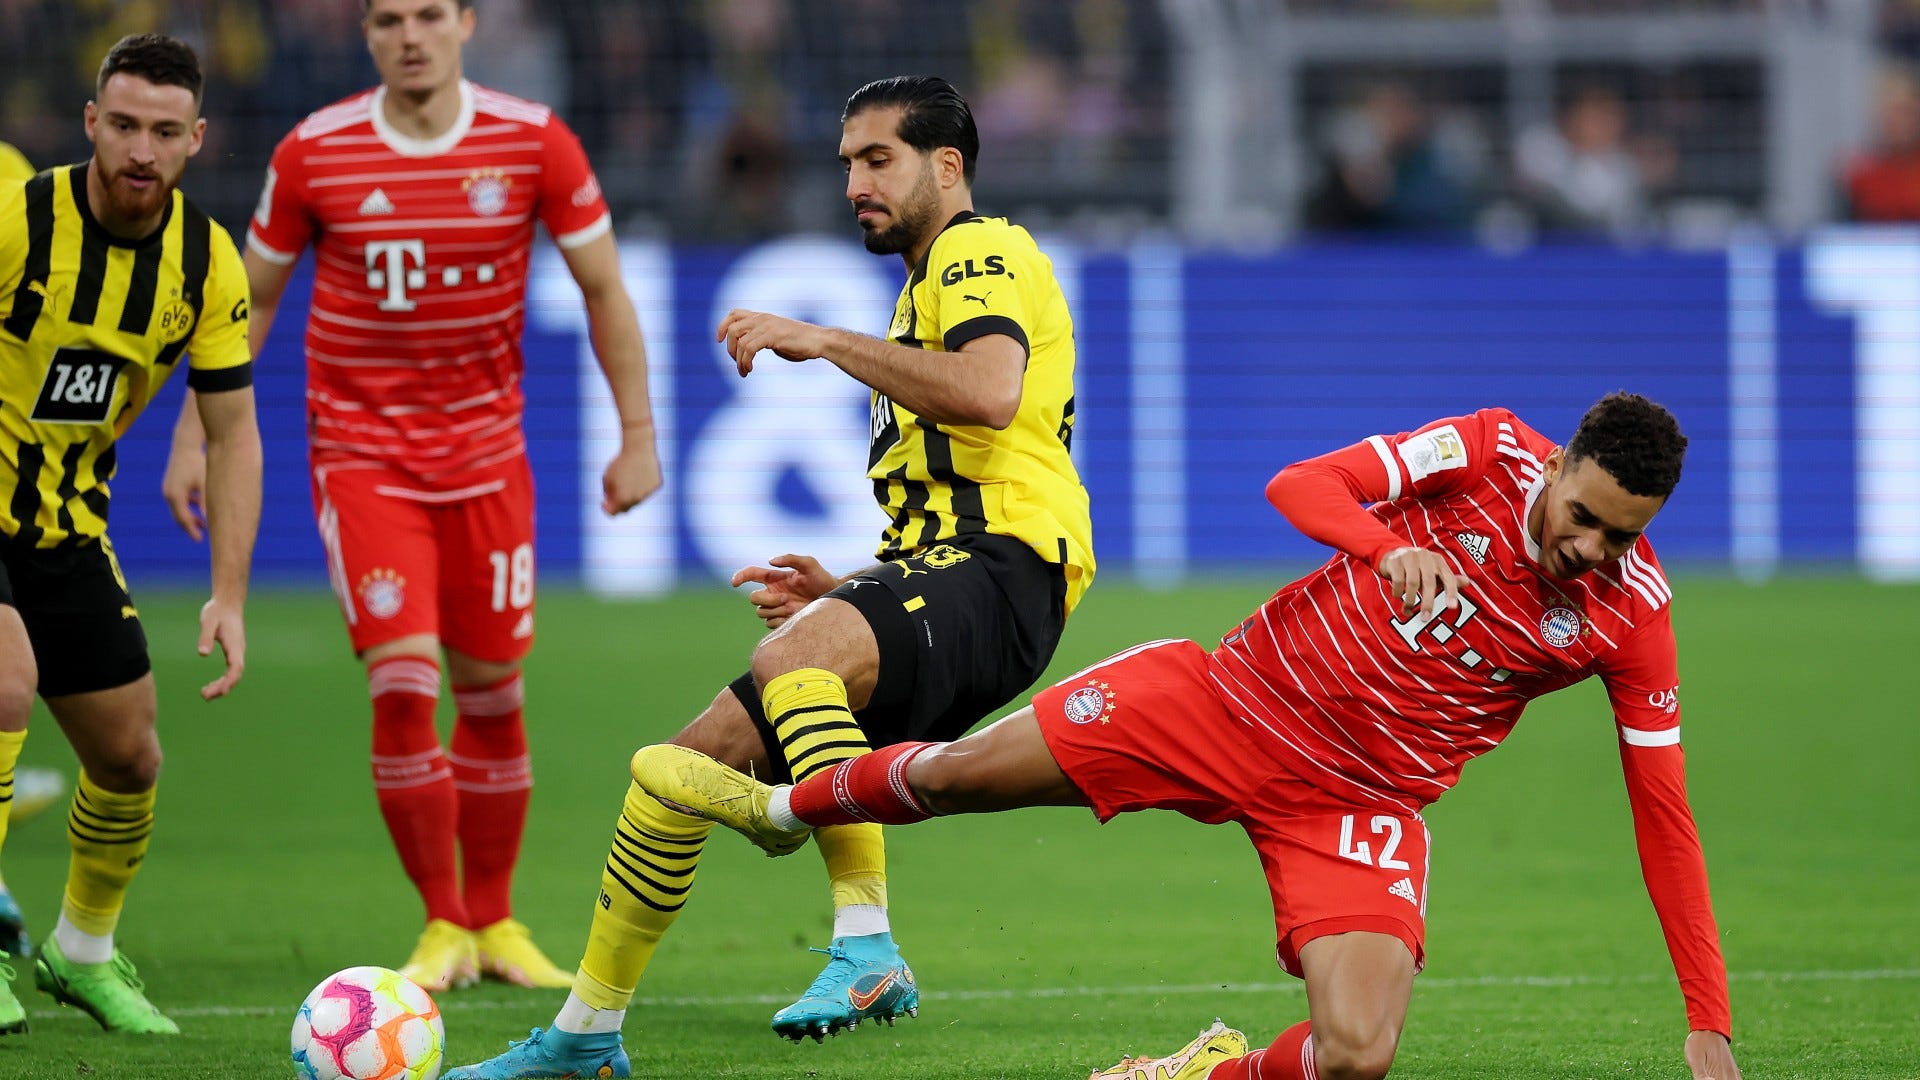 Bayern Munich vs Borussia Dortmund Where to watch the match online, live stream, TV channels and kick-off time Goal US